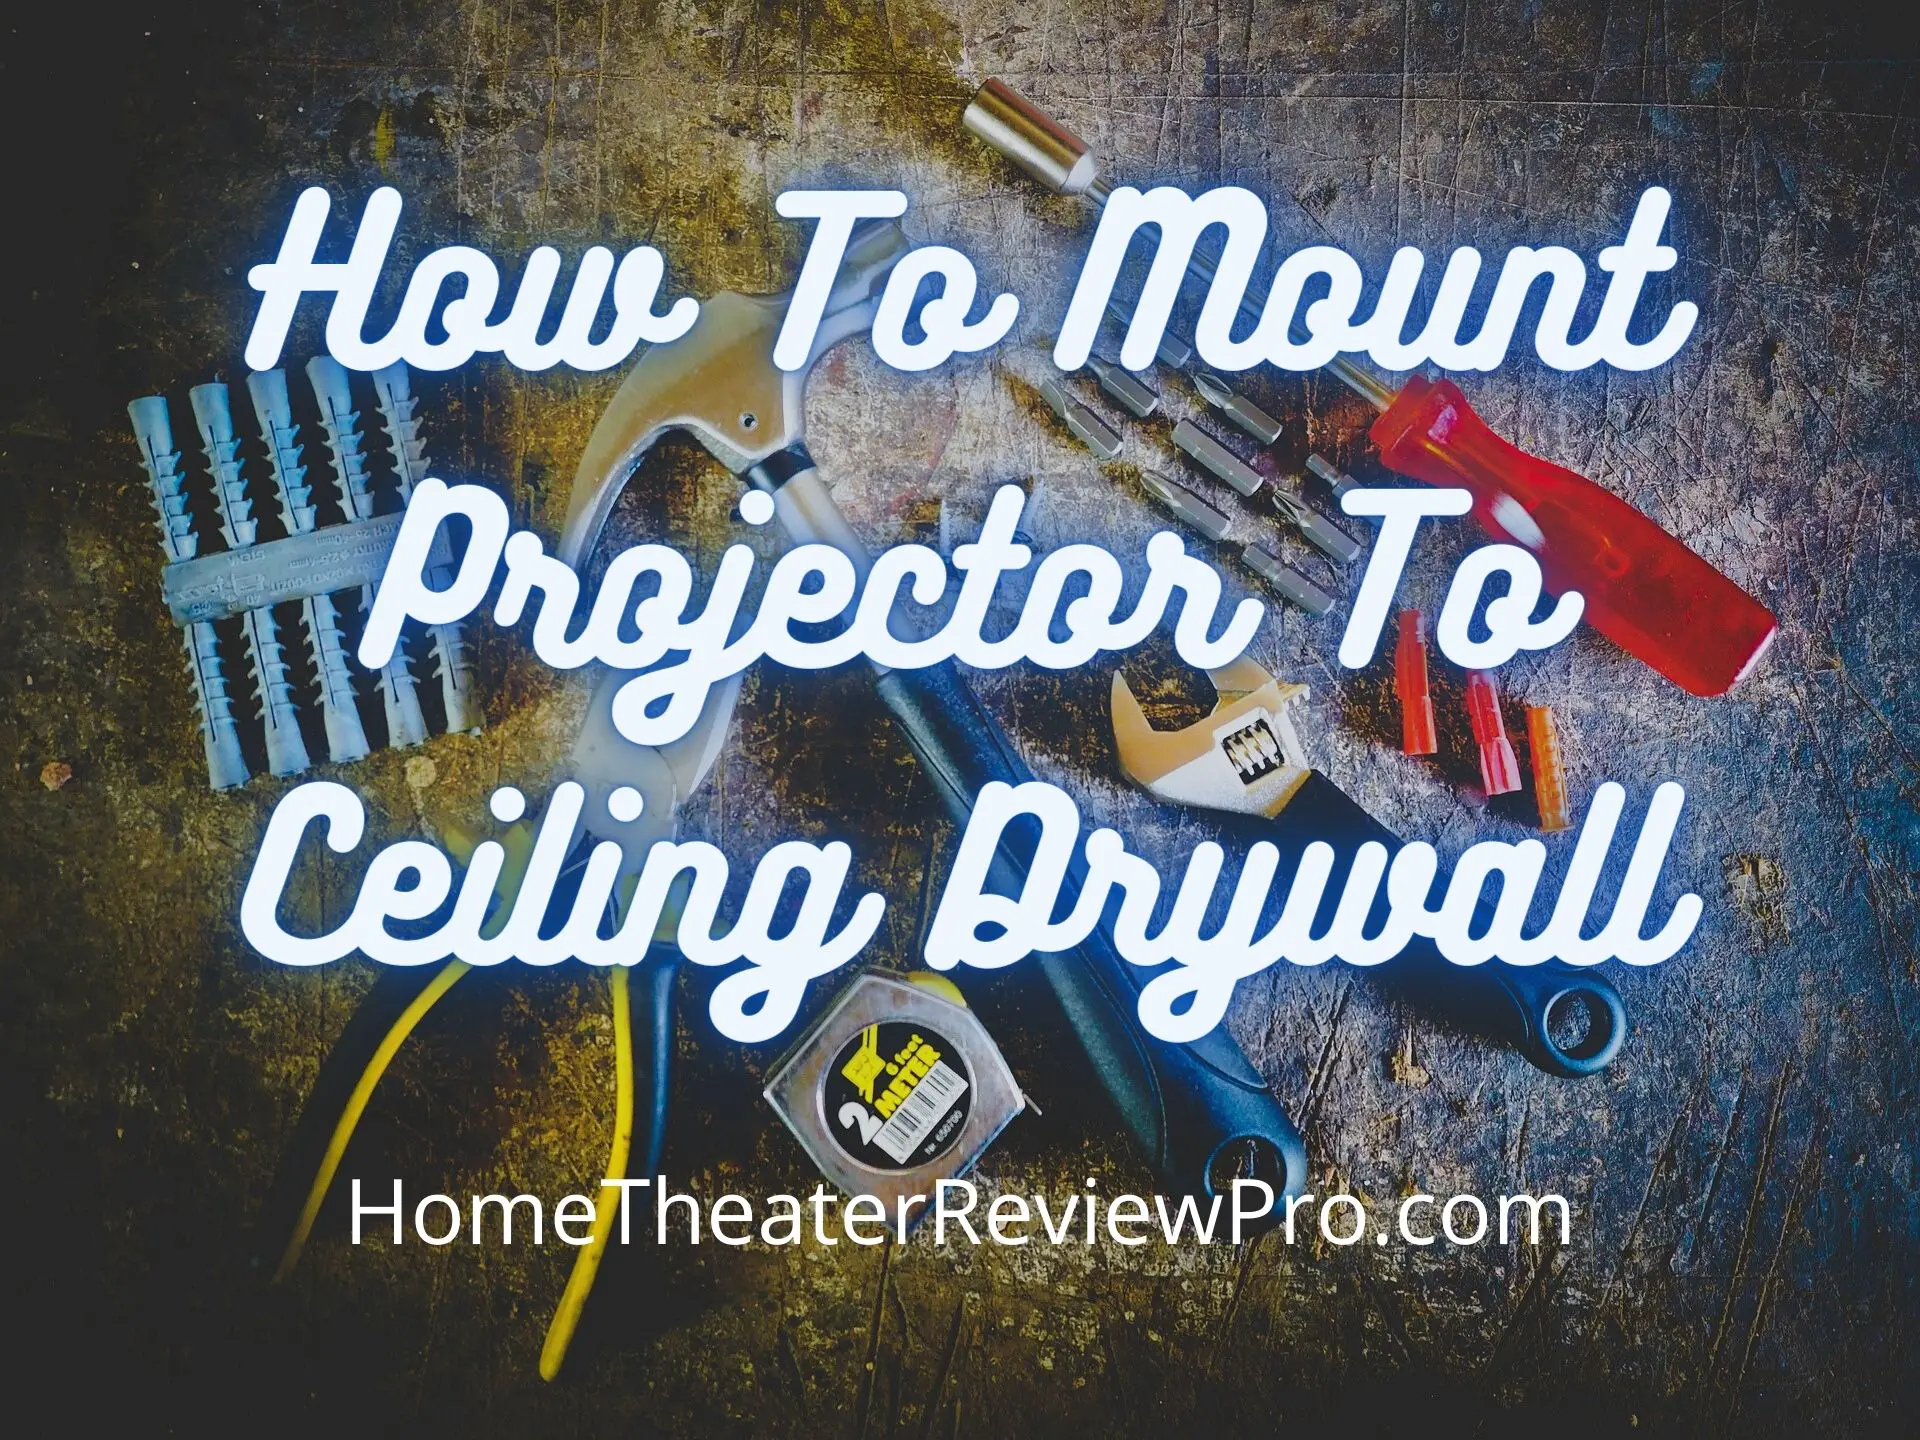 How To Mount Projector To Ceiling Drywall